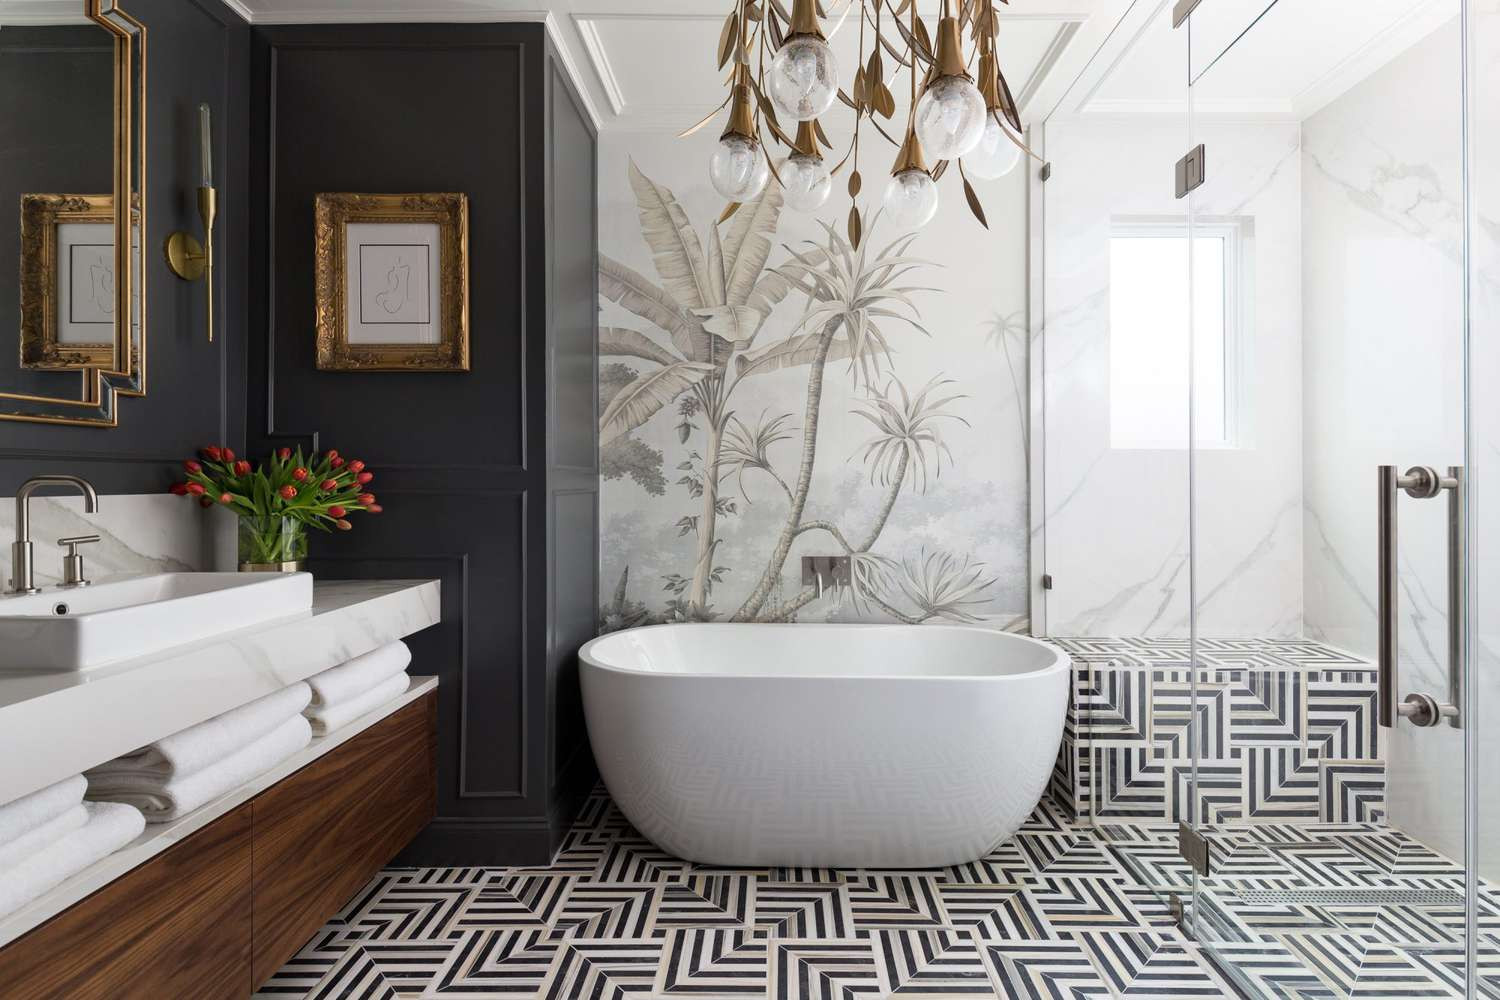 Bathroom Tile Ideas For Showers, Floors, And Walls